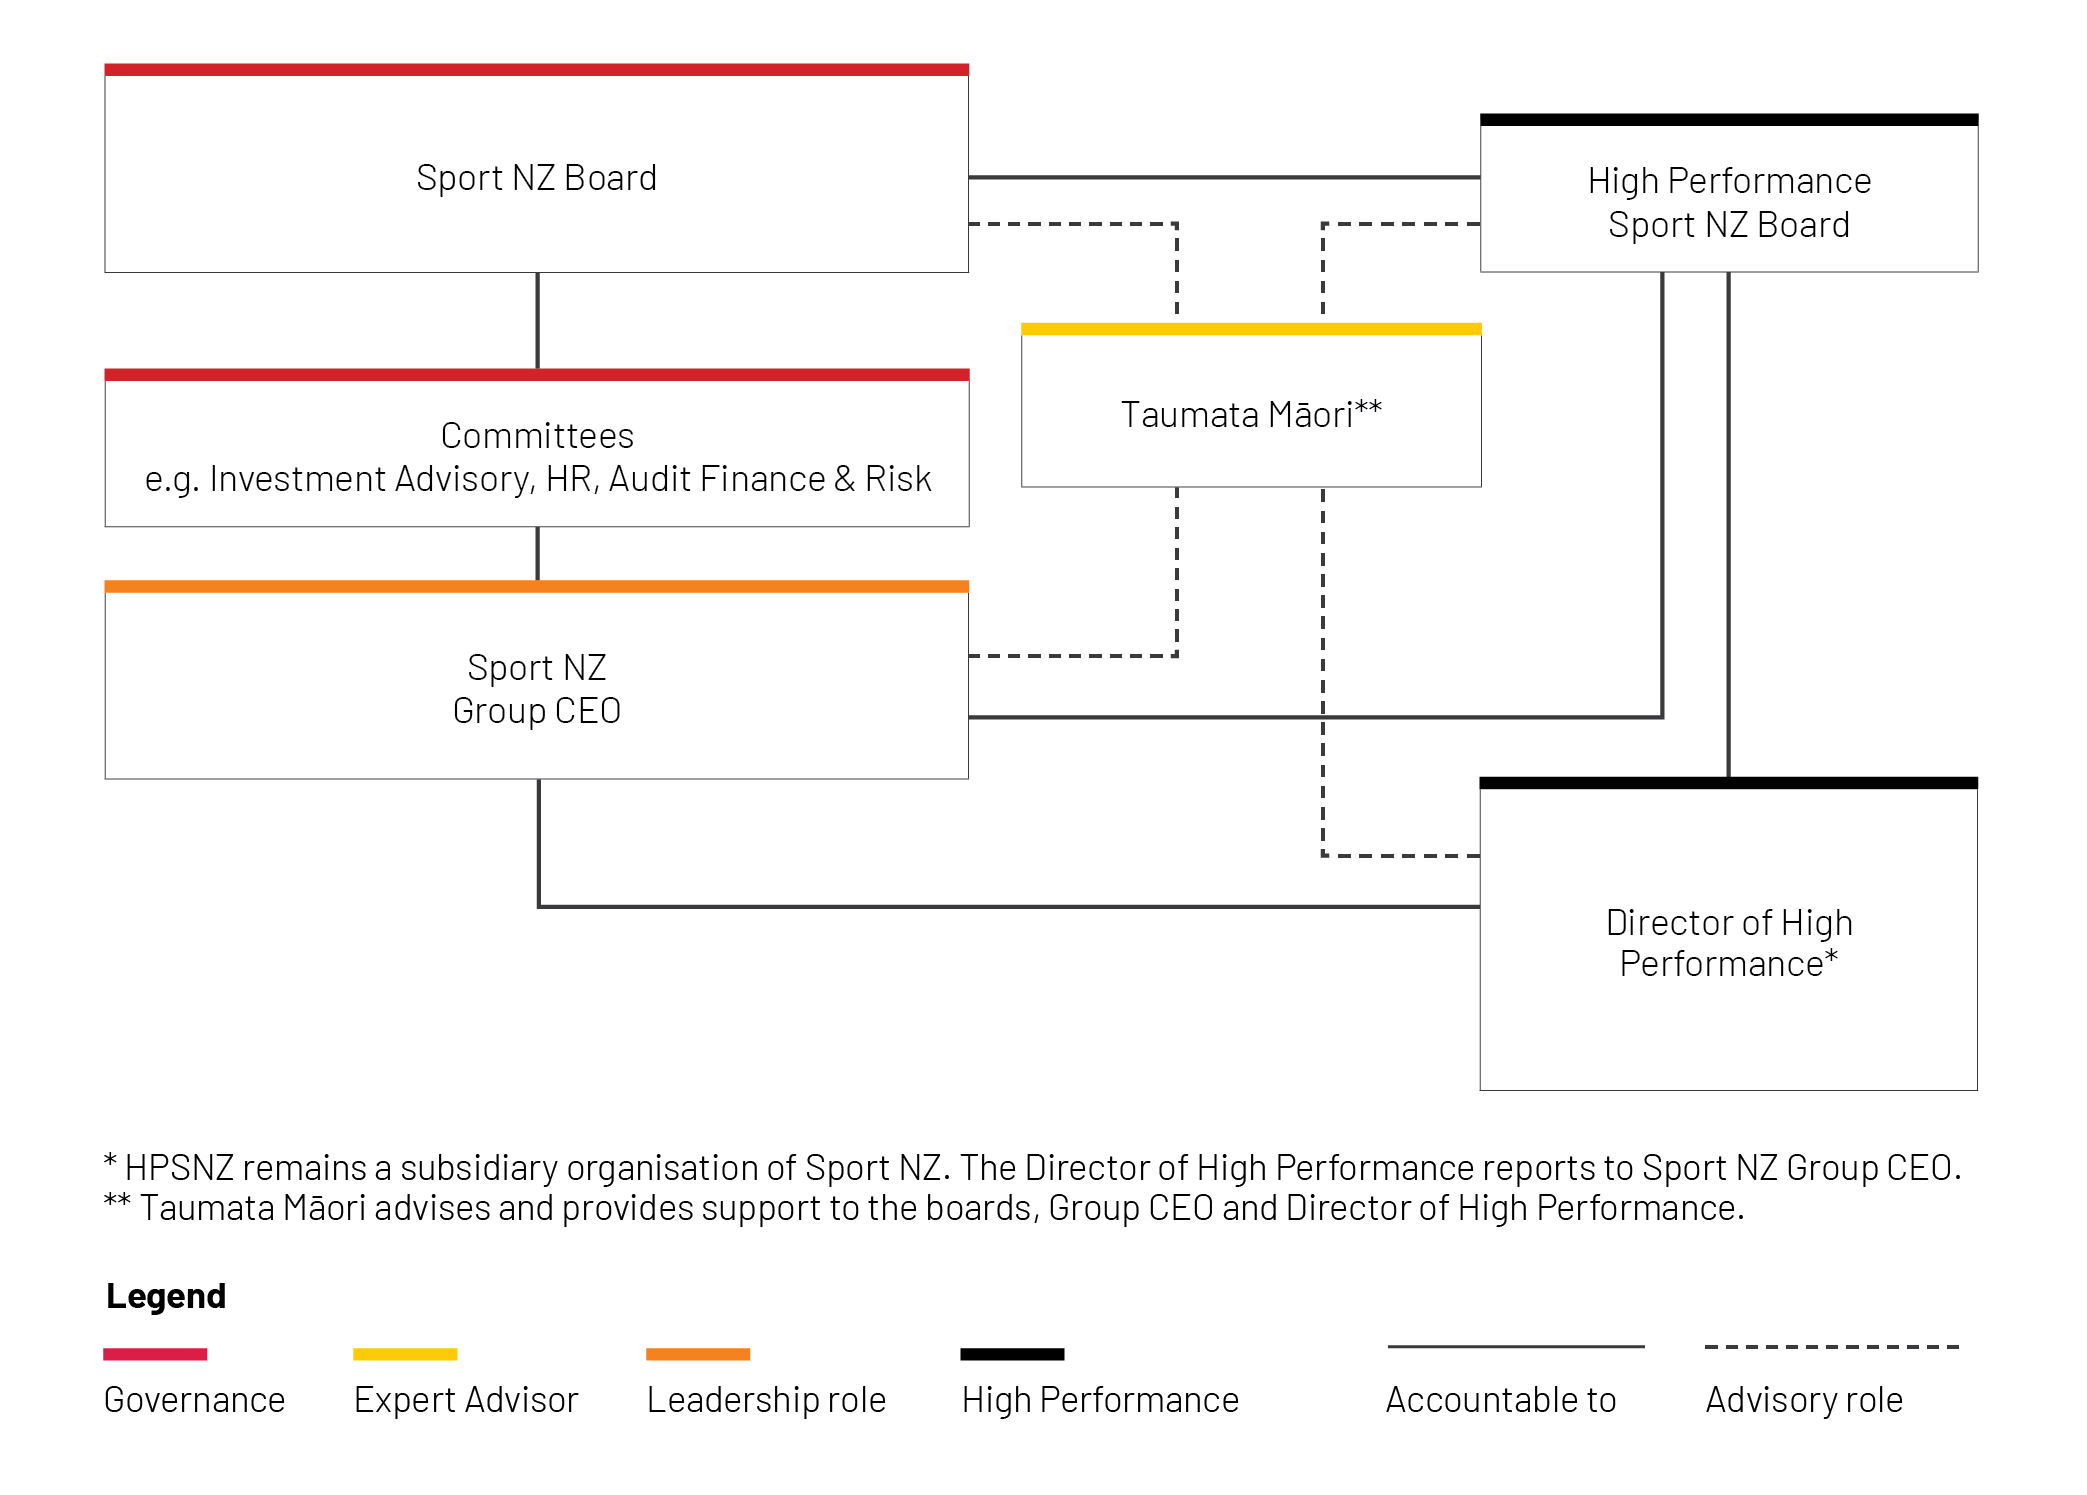 Organisational structure chart for SportNZ and HPSNZ